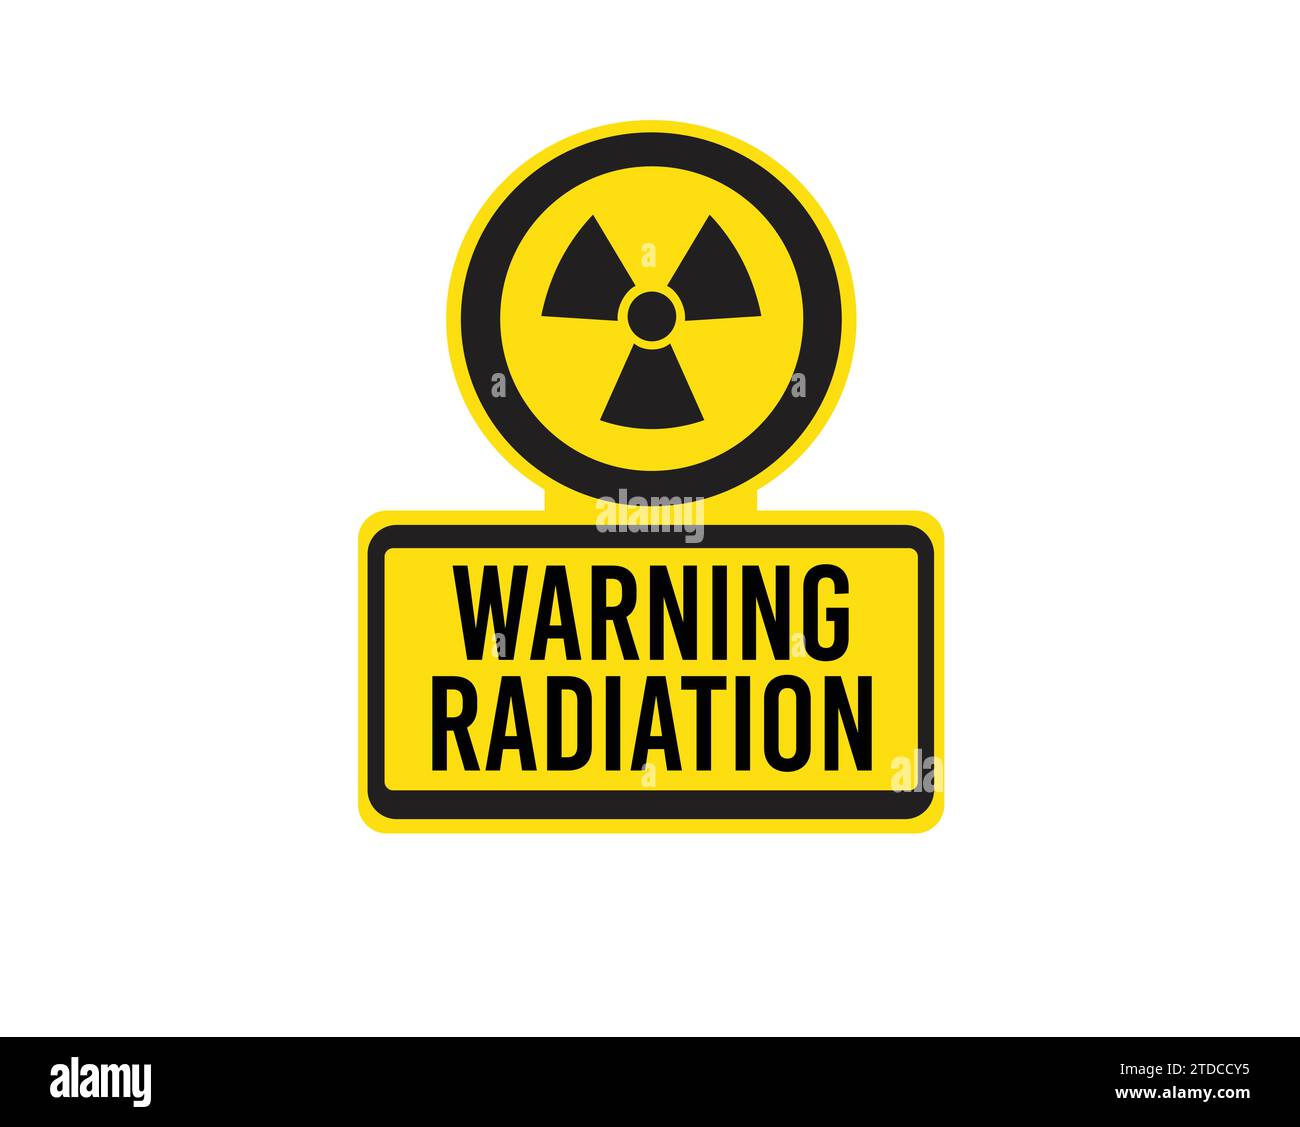 Warning radiation sign in yellow and black .  Nuclear fallout hazard danger, sticker vector icon isolated. Stock Vector